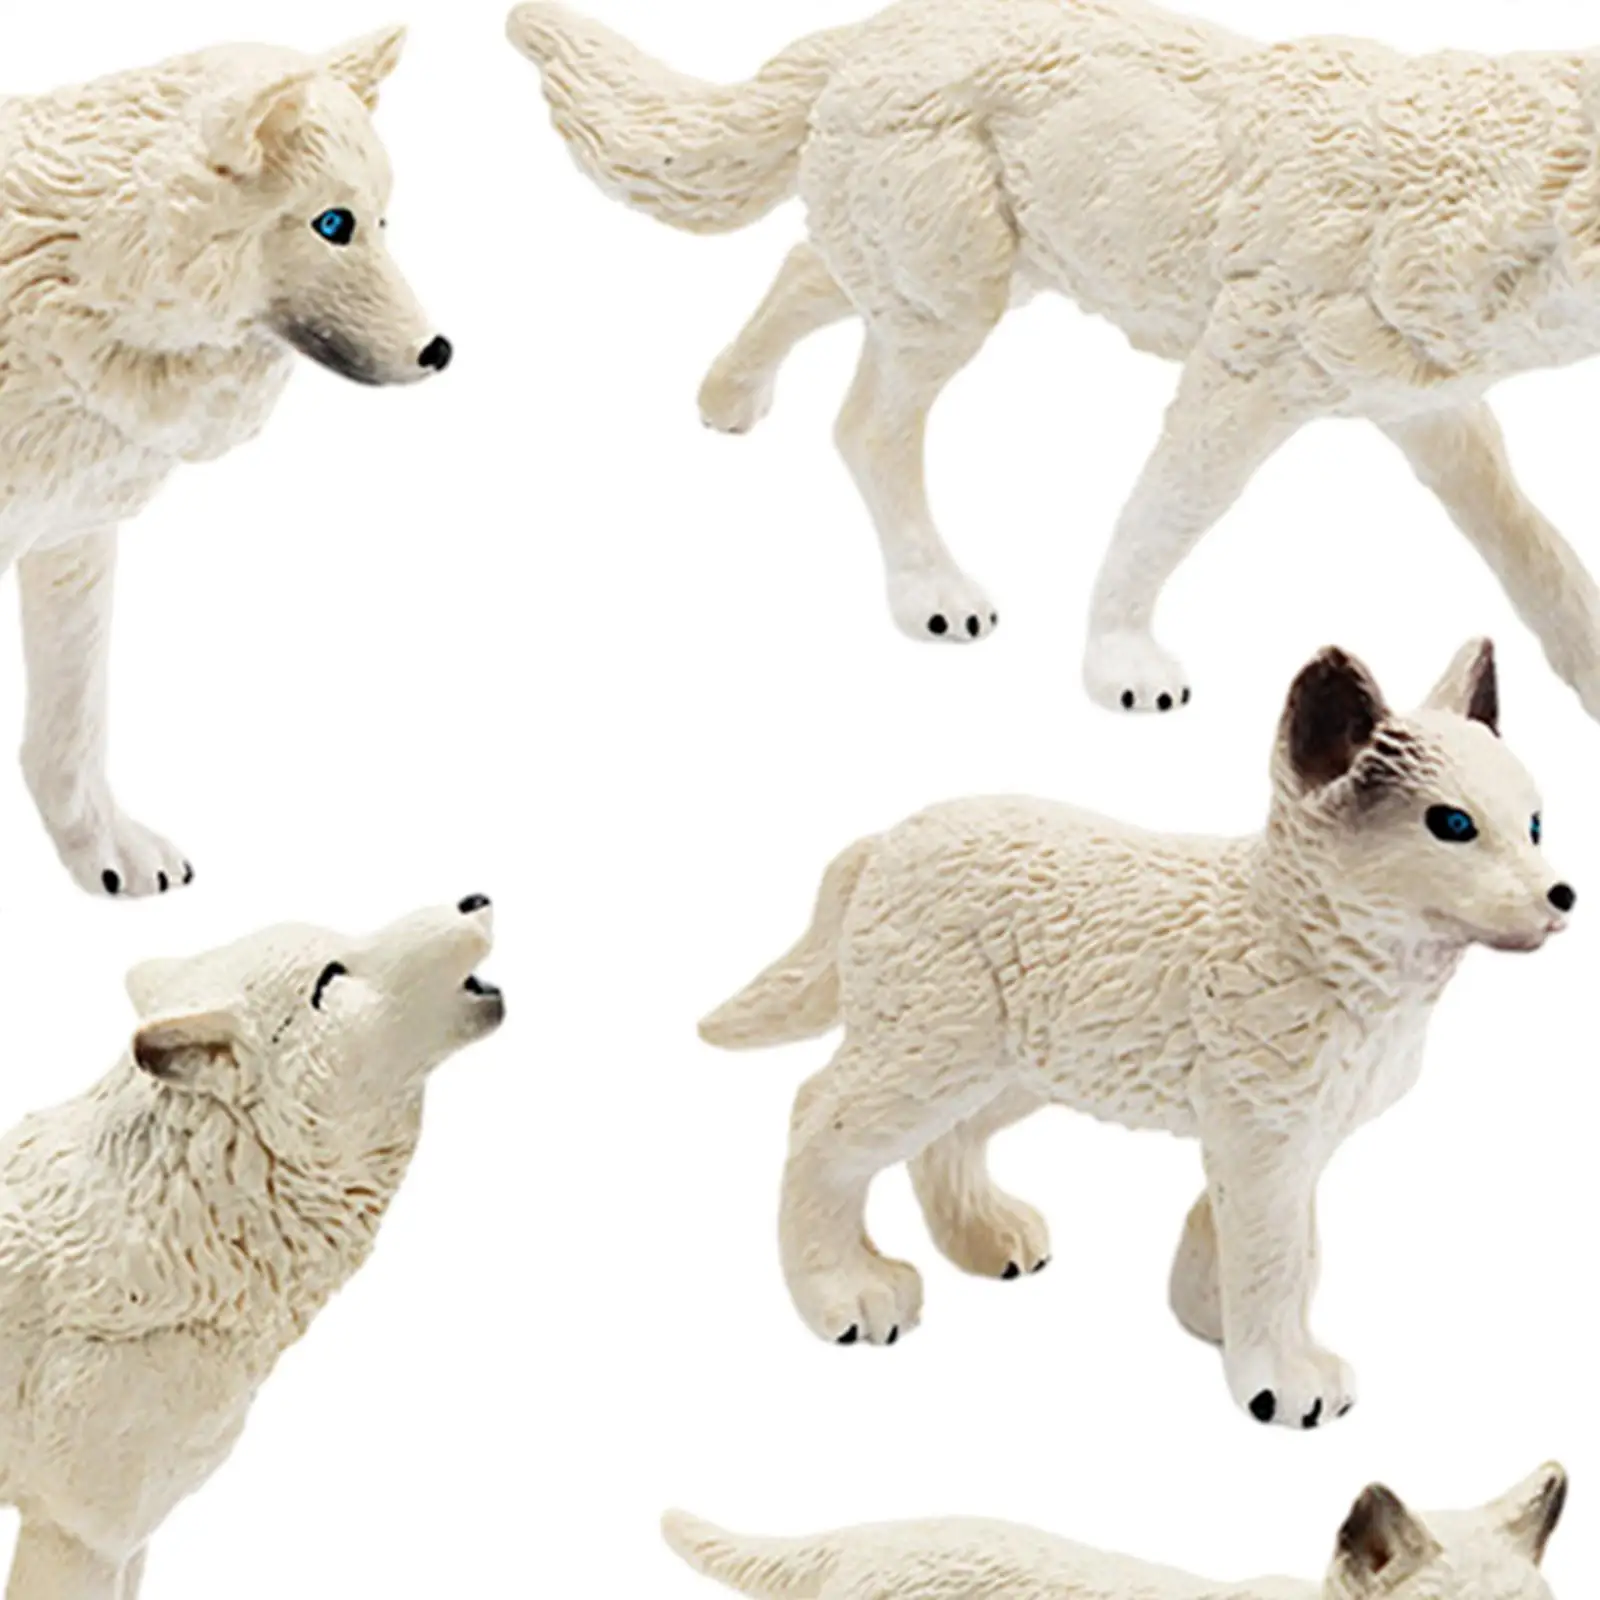 5Pcs Wolf Figurines White Wolf Playset Model Preschool Simulation Wildlife Animal Statue for Birthday Gifts Cake Topper